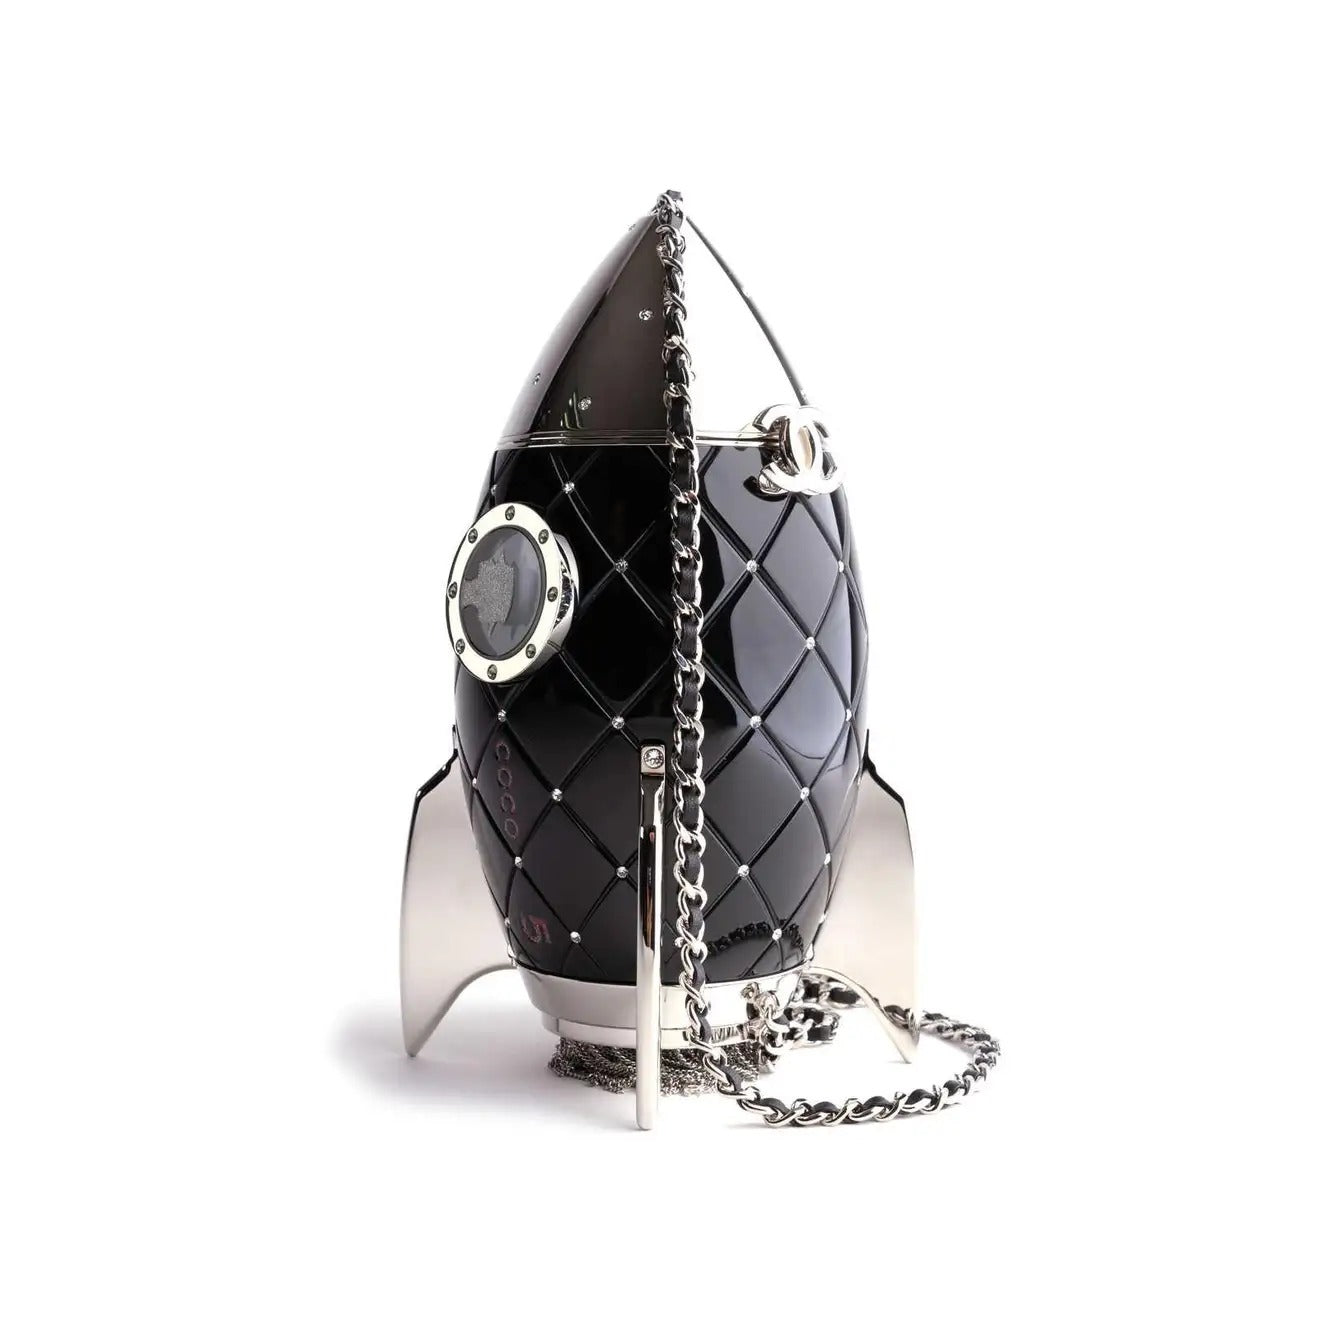 Chanel Runway Rare Black Resin Leather Silver Rocket Evening